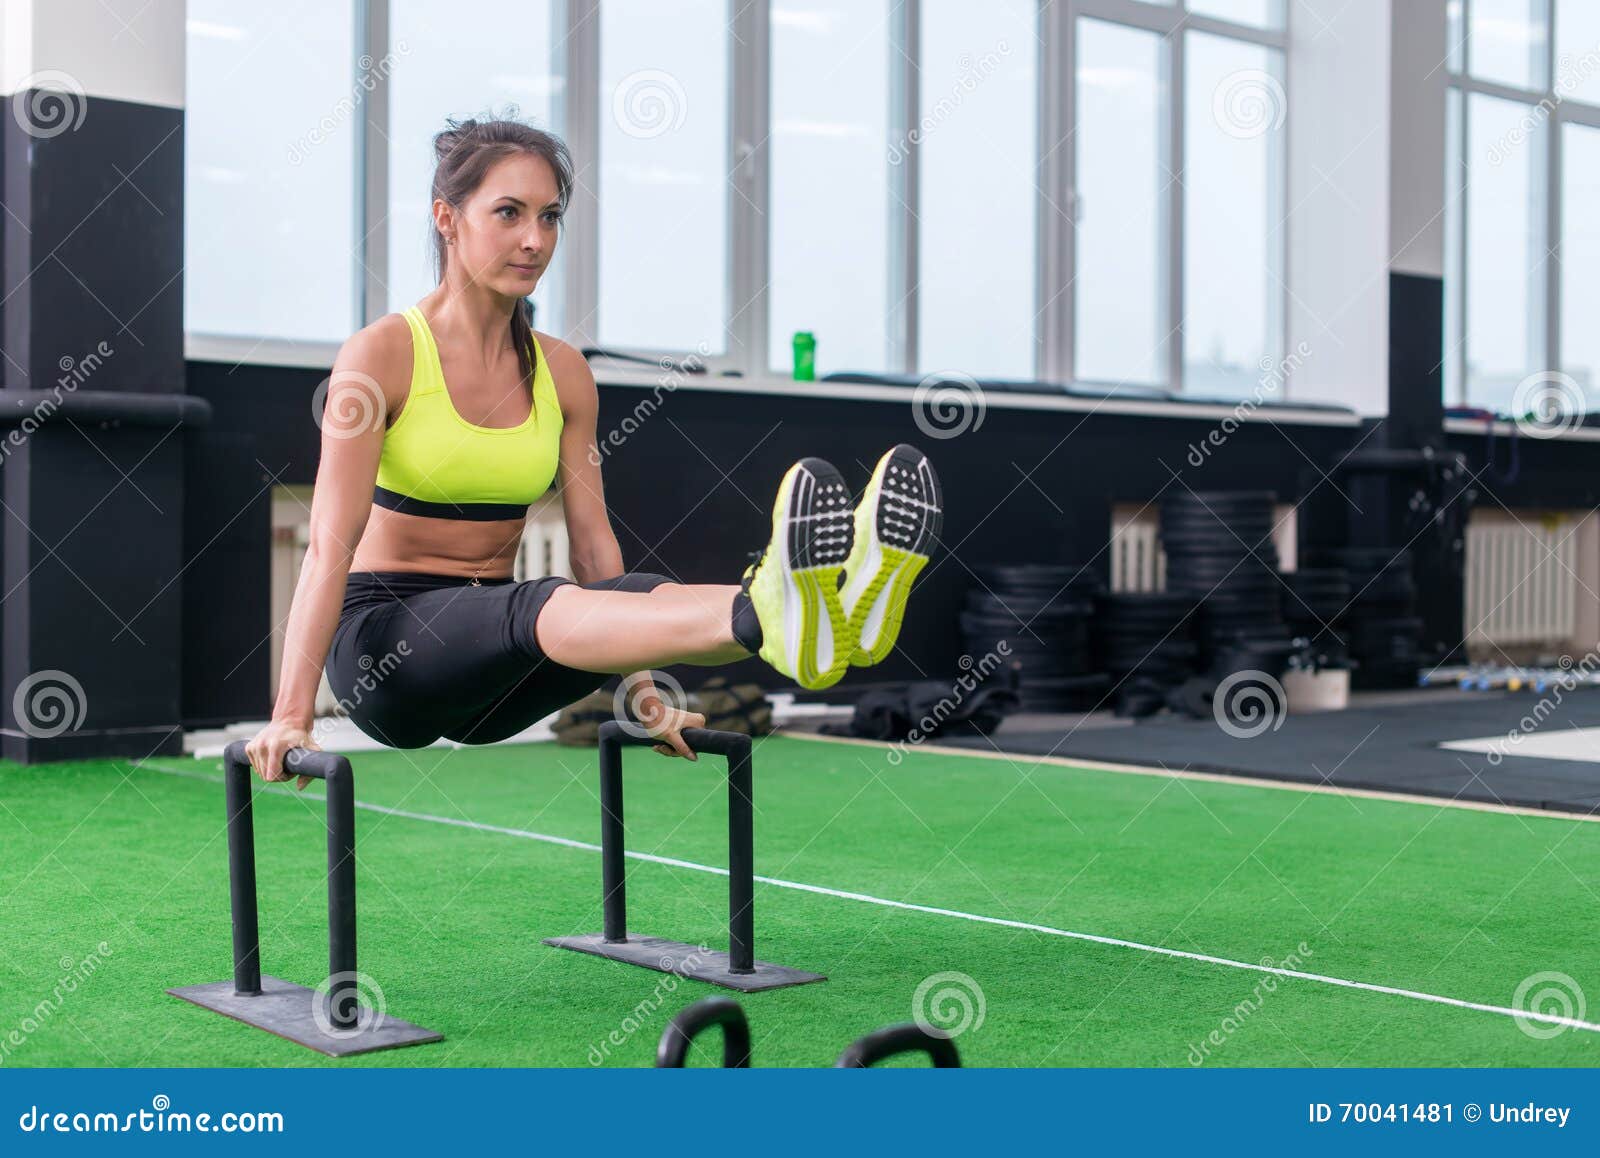 Fit Strong Woman Doing L-sits Work-out in Gym, Lifting Up Her Legs, Using  Parallel Bars Stock Image - Image of effort, exercise: 70041481